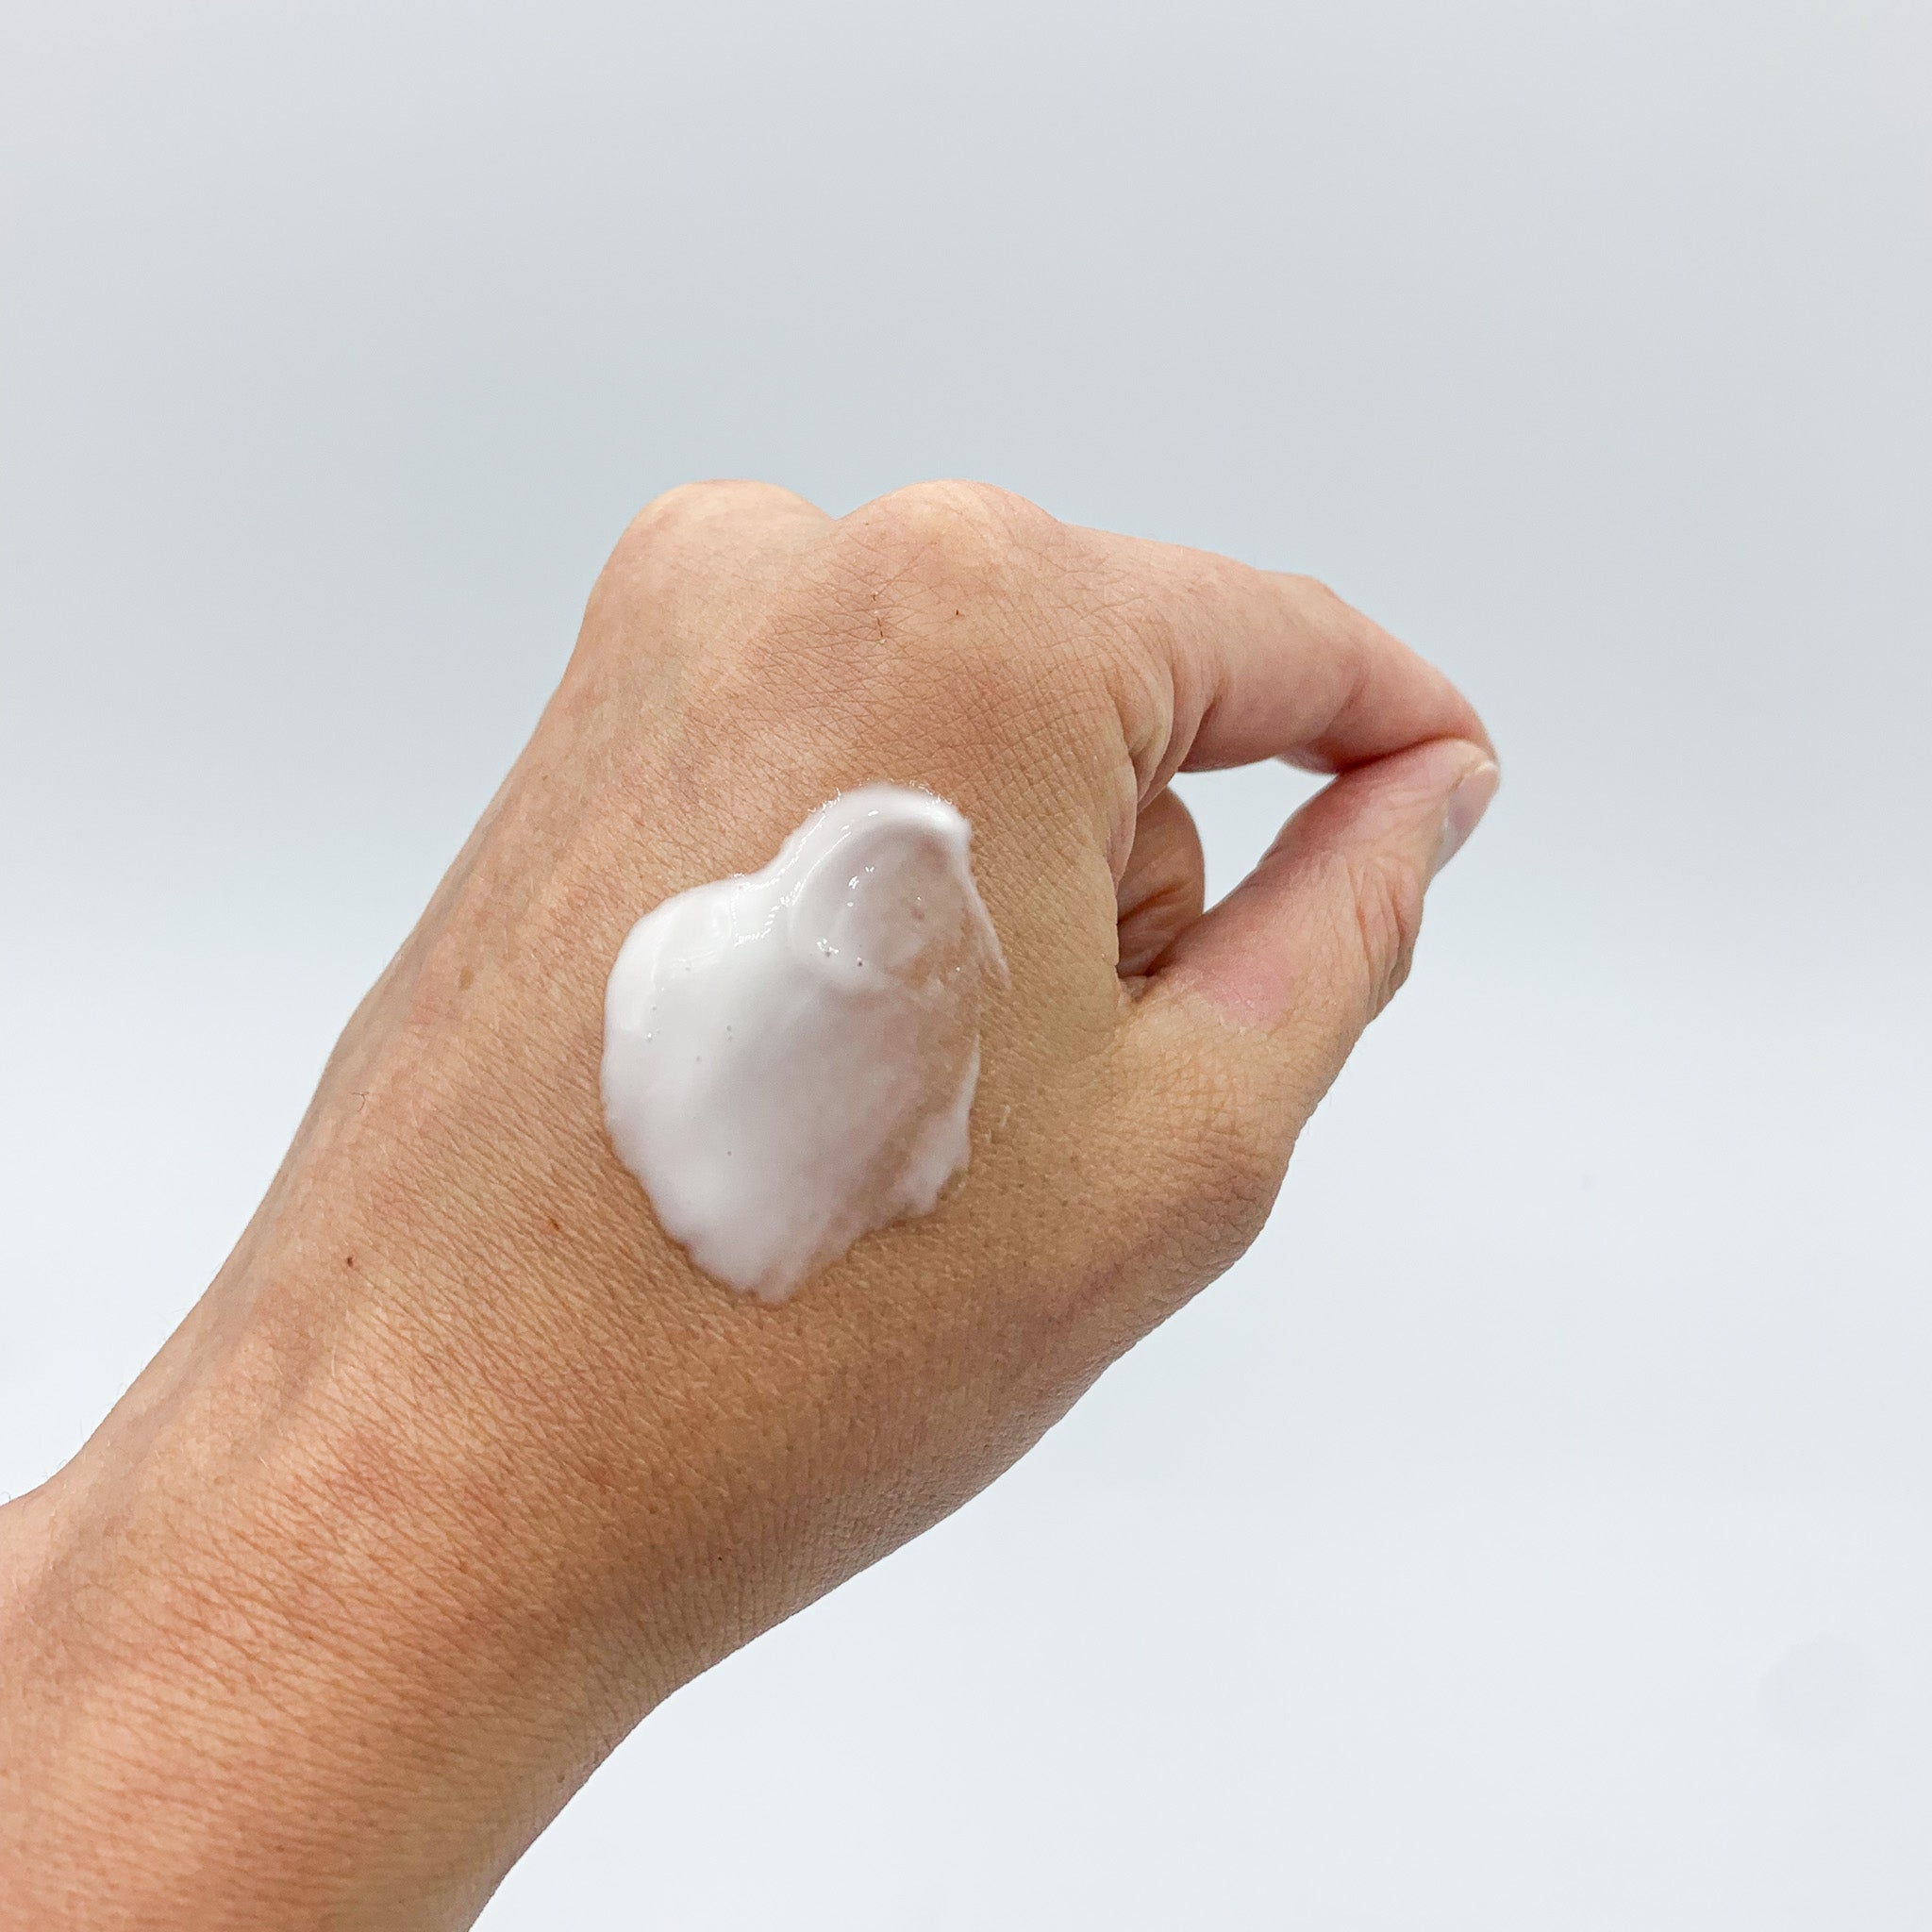 Non-greasy and fast absorbing vanilla and coconut body lotion smeared on hand.